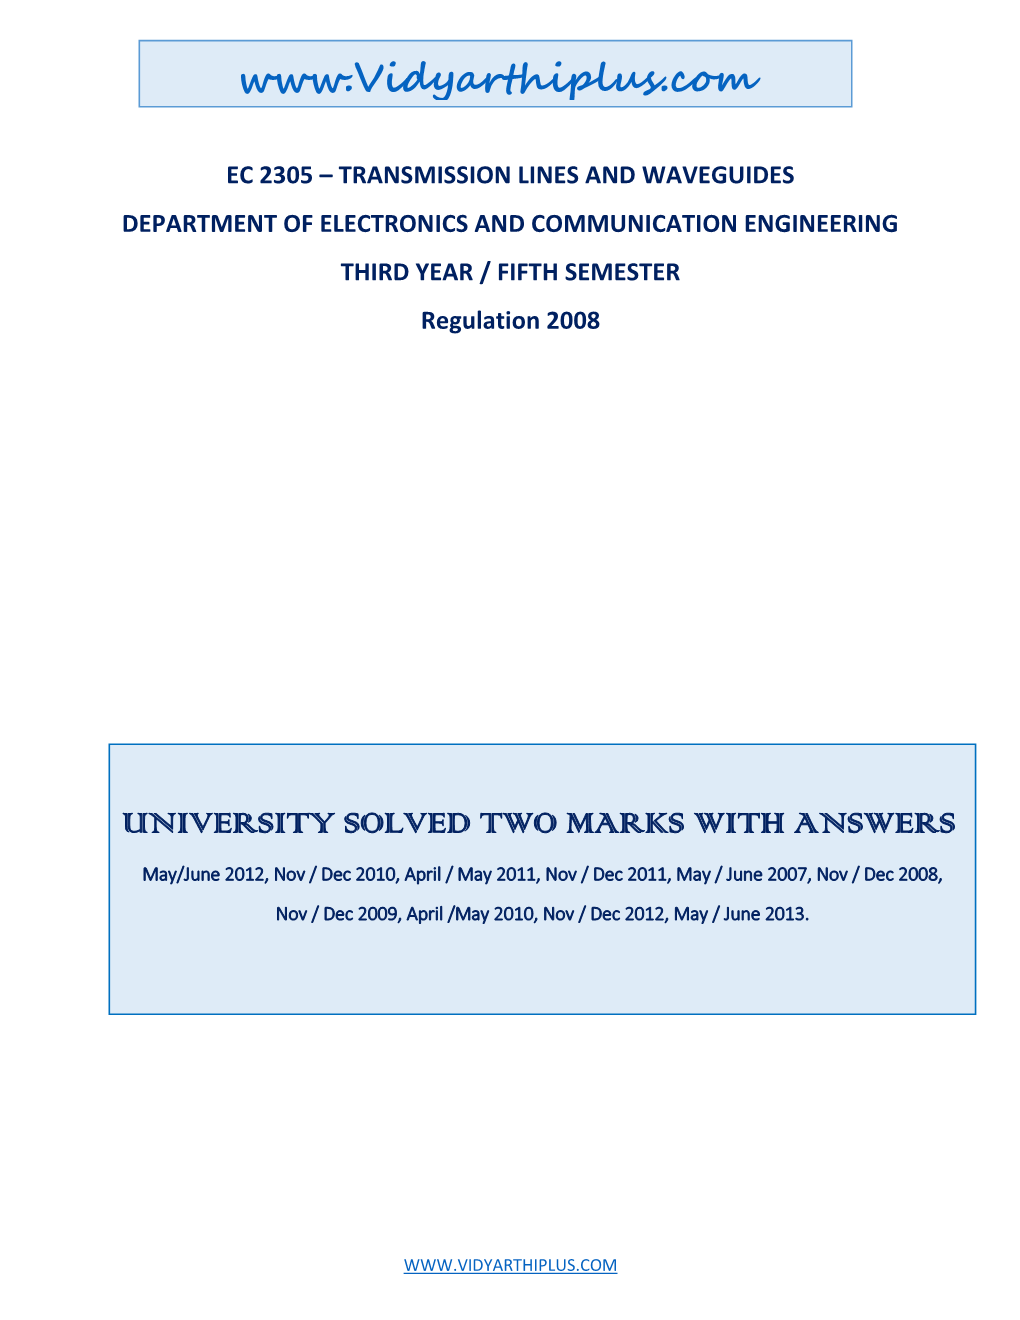 EC 2305 – TRANSMISSION LINES and WAVEGUIDES DEPARTMENT of ELECTRONICS and COMMUNICATION ENGINEERING THIRD YEAR / FIFTH SEMESTER Regulation 2008